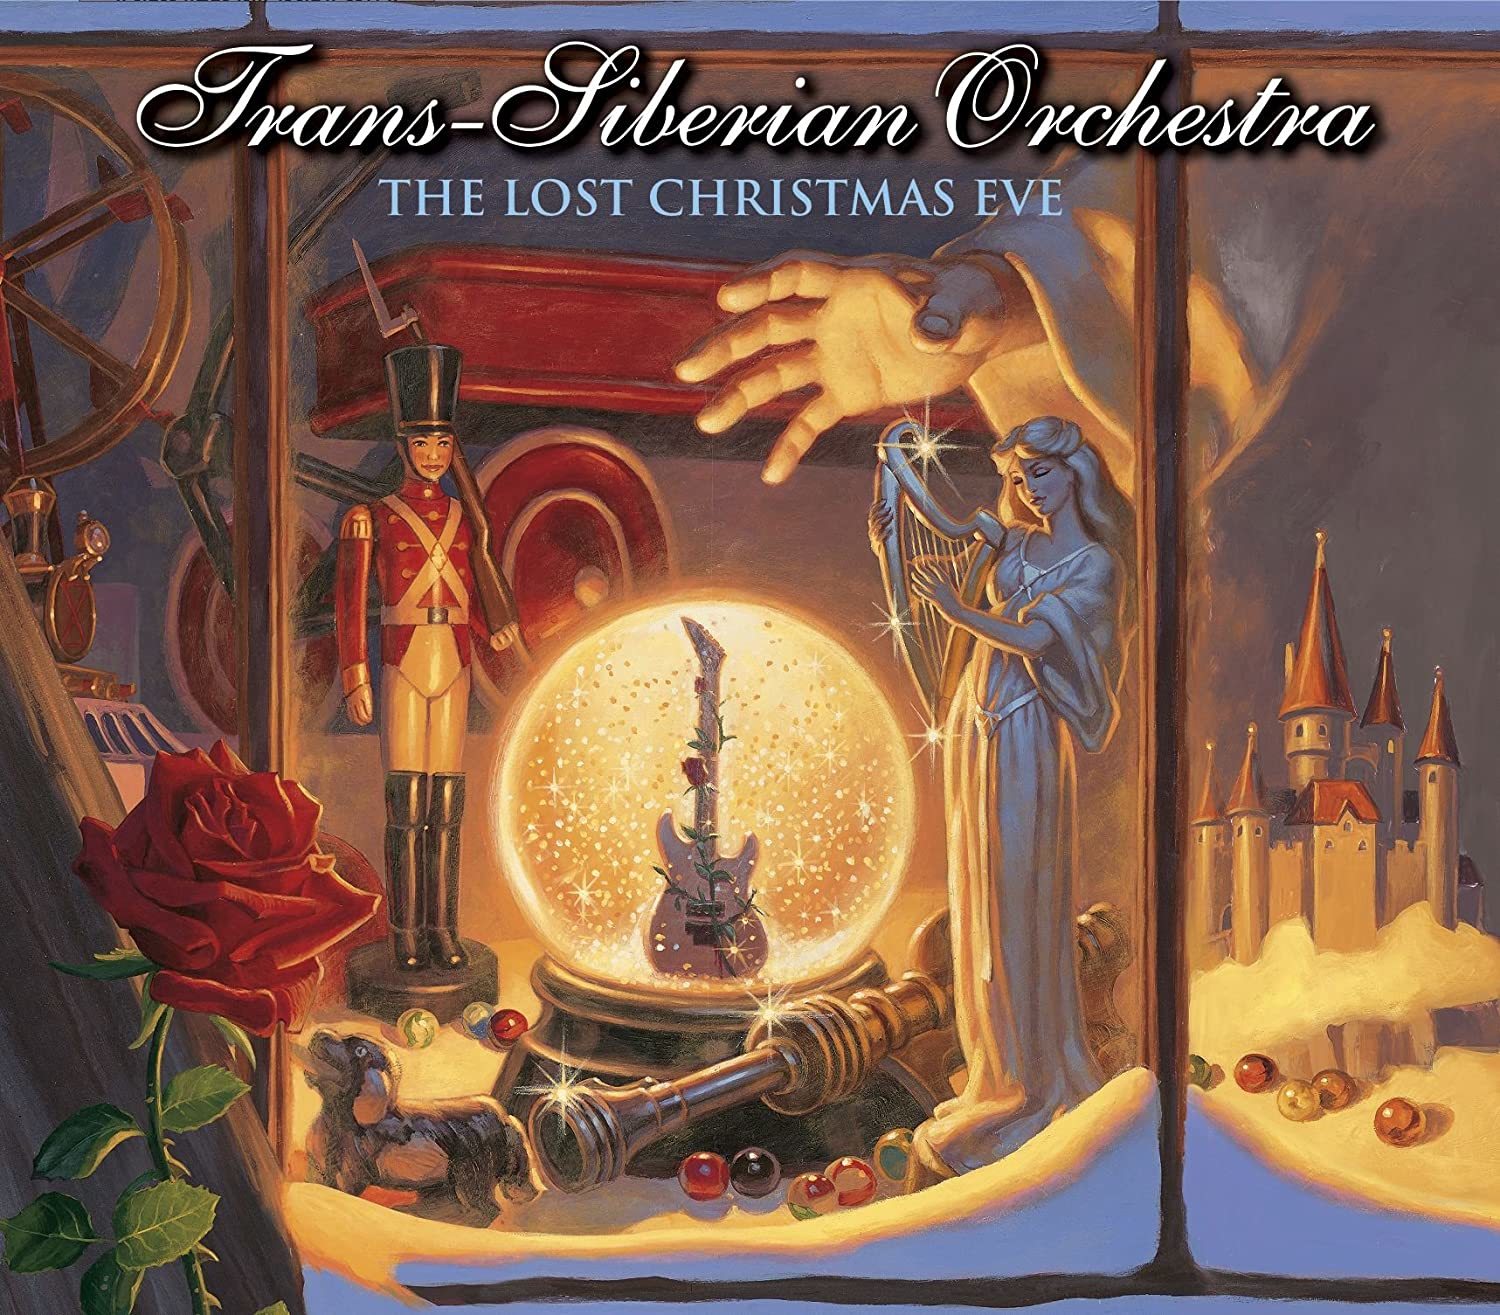 Trans-Siberian Orchestra ƒ?? The Lost Christmas Eve (2004, CD)